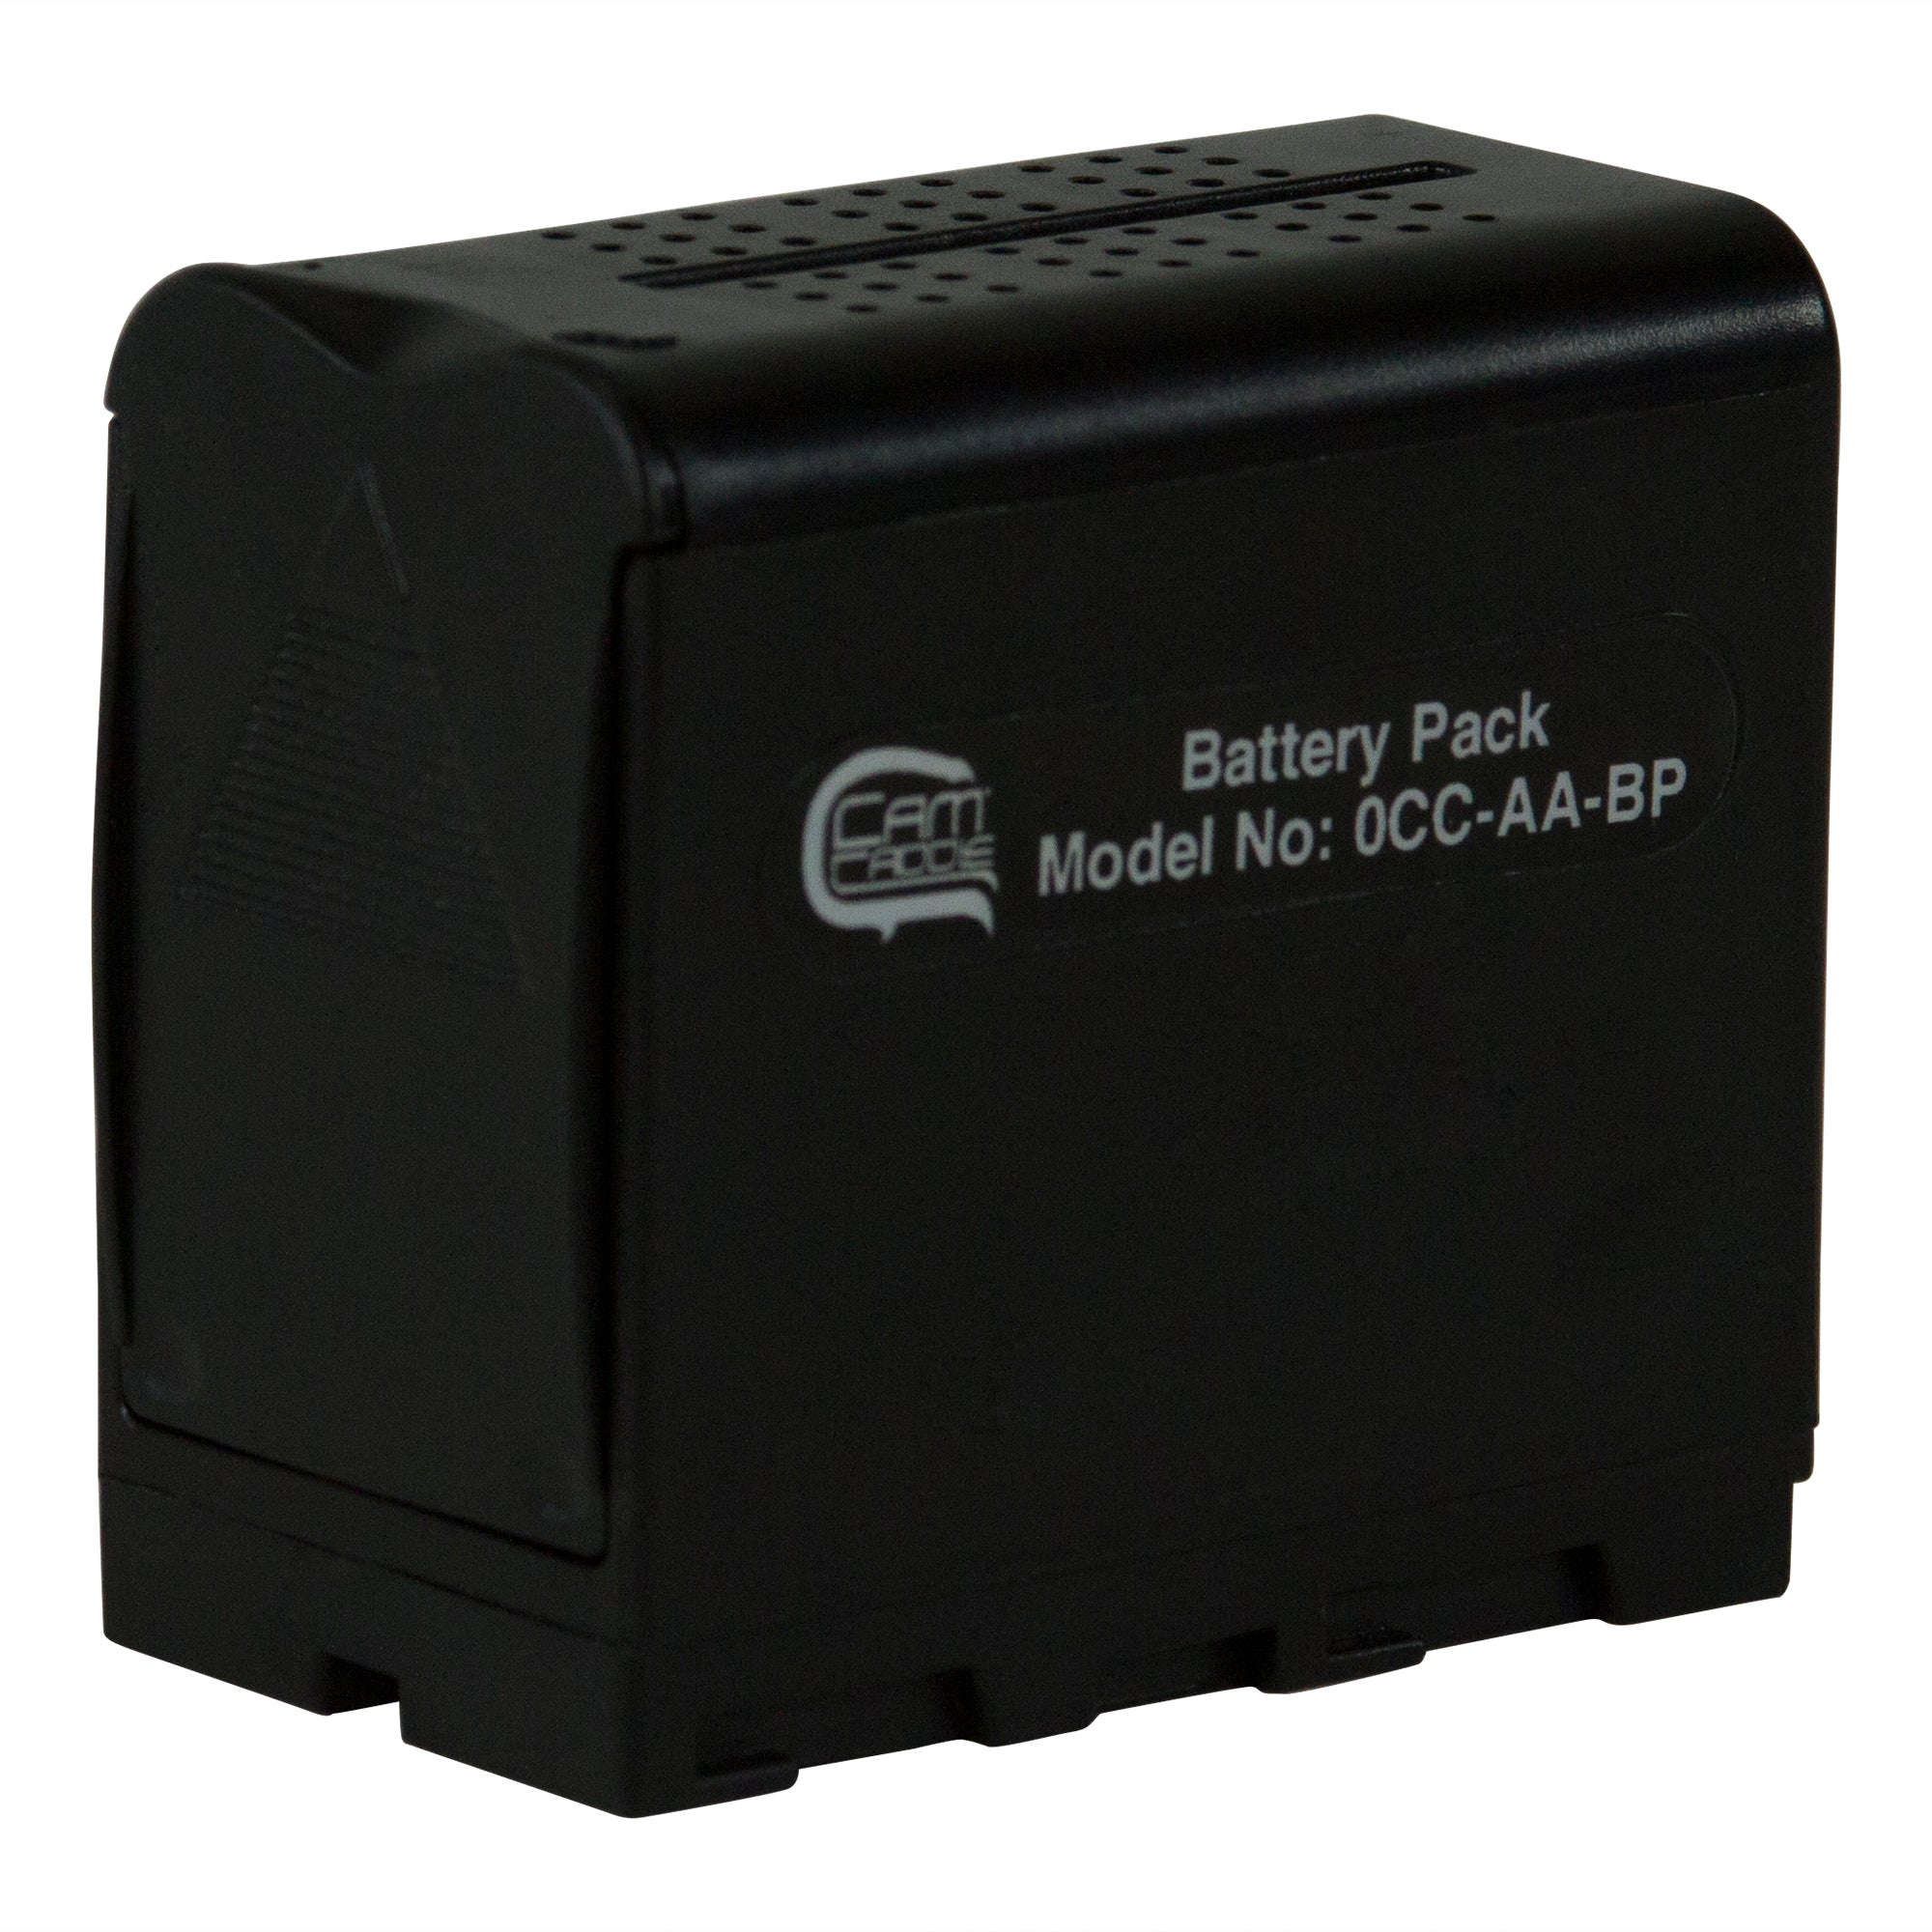 Cam Caddie AA Battery Pack Converter for SONY NP-F Series Monitors and LED Lights - Cam Caddie - The Original Universal Stabilizing Camera Handle